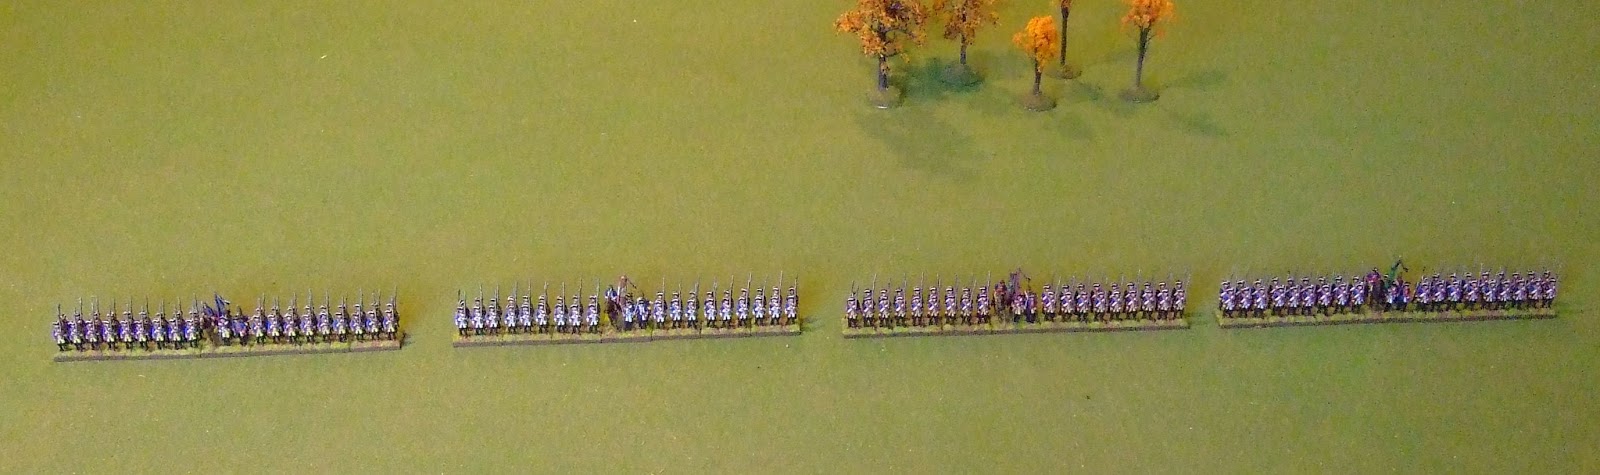 7YW Prussian Infantry miniatures